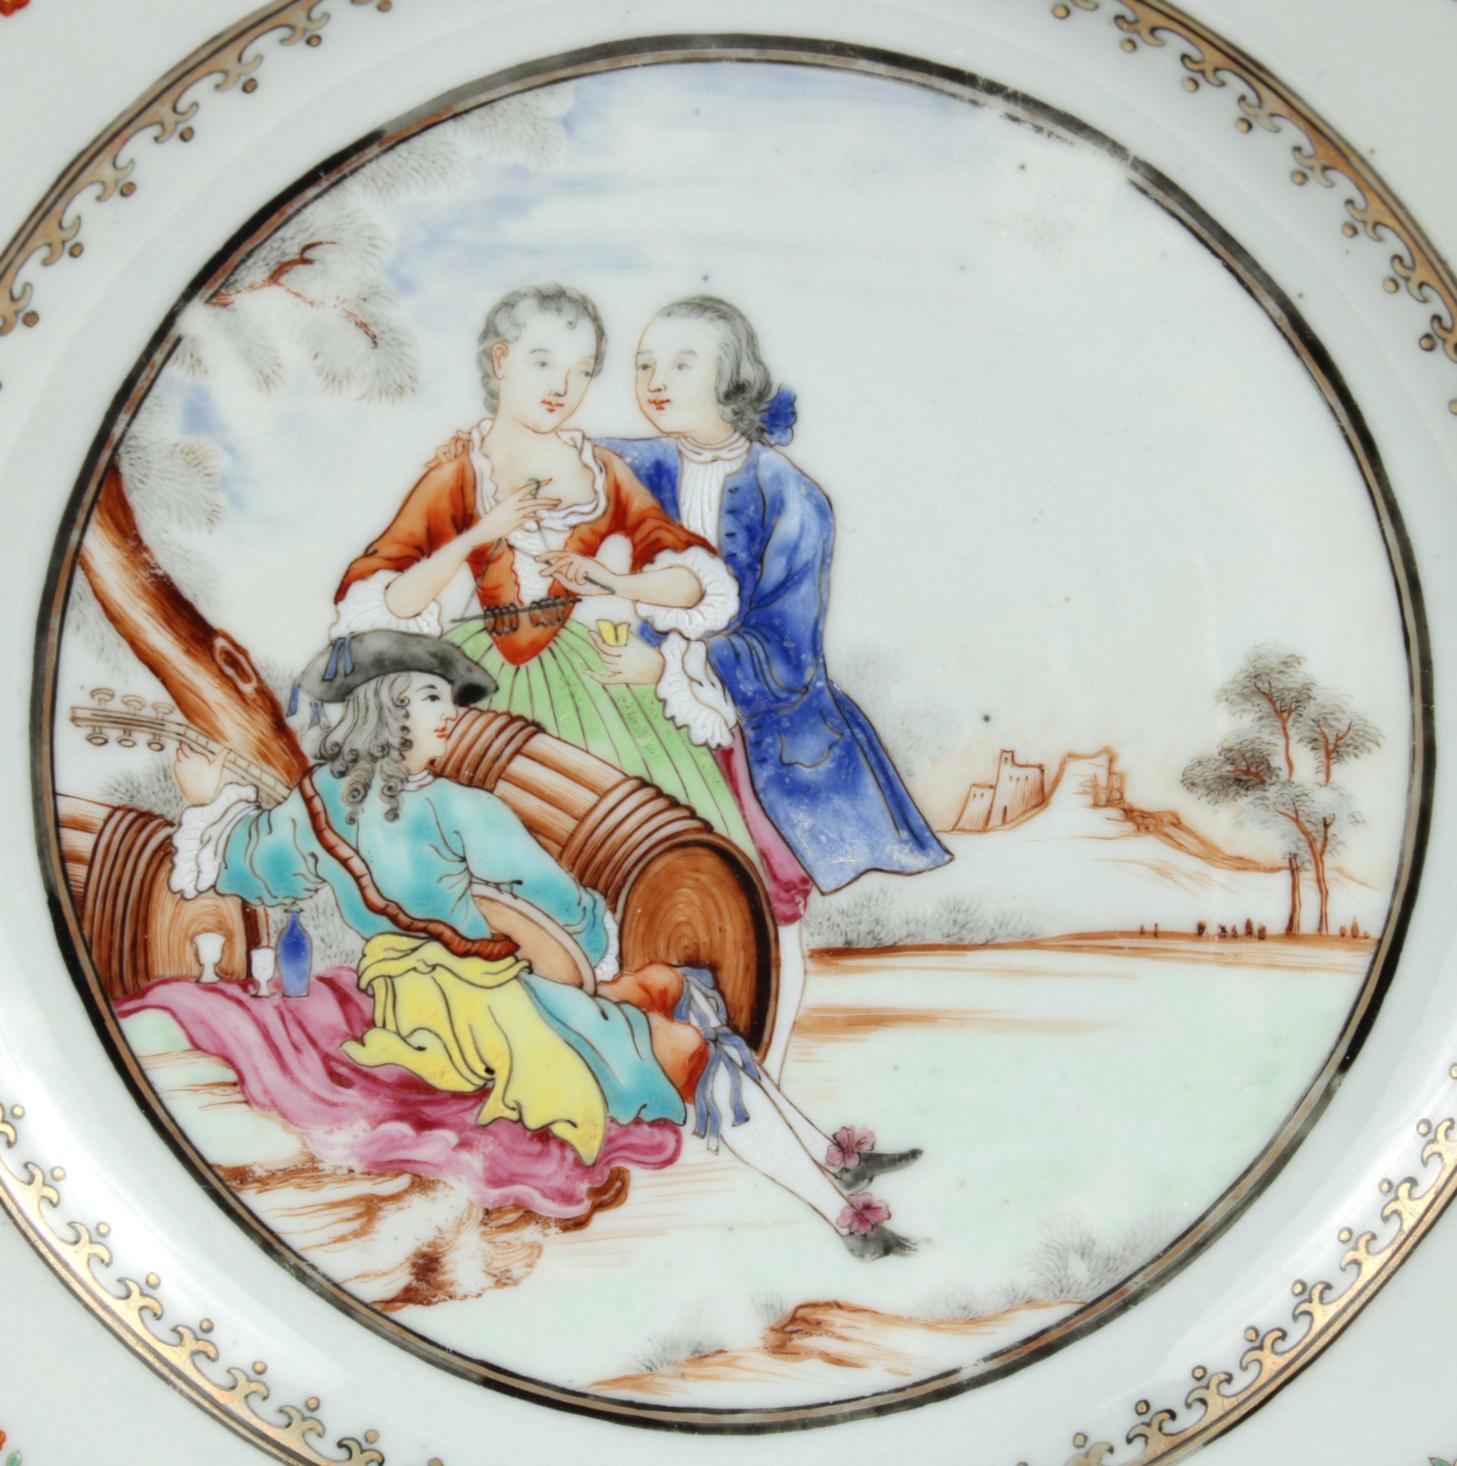 Chinese Export porcelain plate, the center painted with a troubadour playing a lute and reclining near a decanter and two glasses amidst two barrels, while a gentleman caresses a woman playing the triangle; the elaborate border painted with brightly